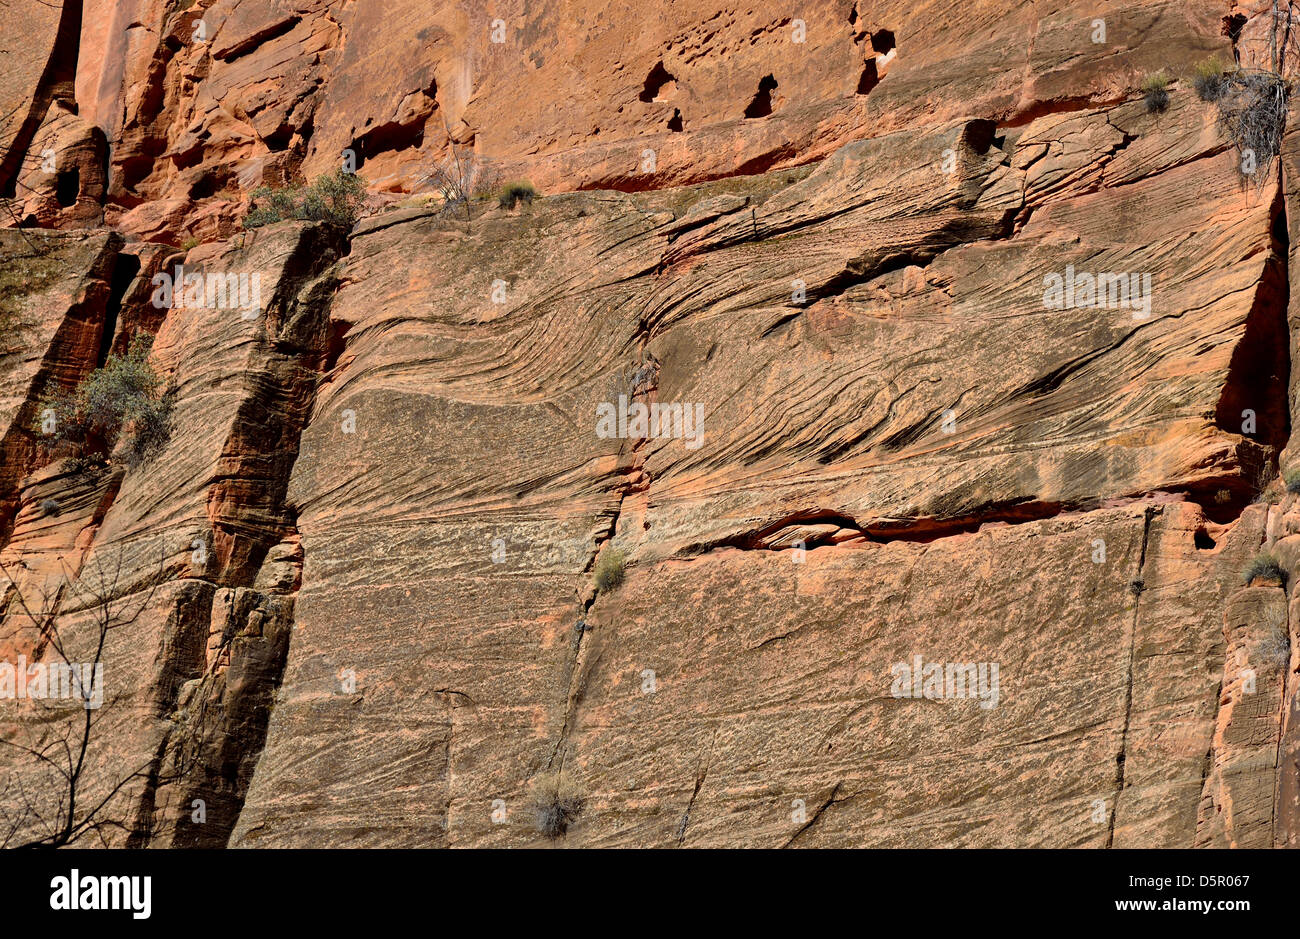 Cross beds of eolian sandstone on a rock wall. Zion National Park, Utah, USA. Stock Photo